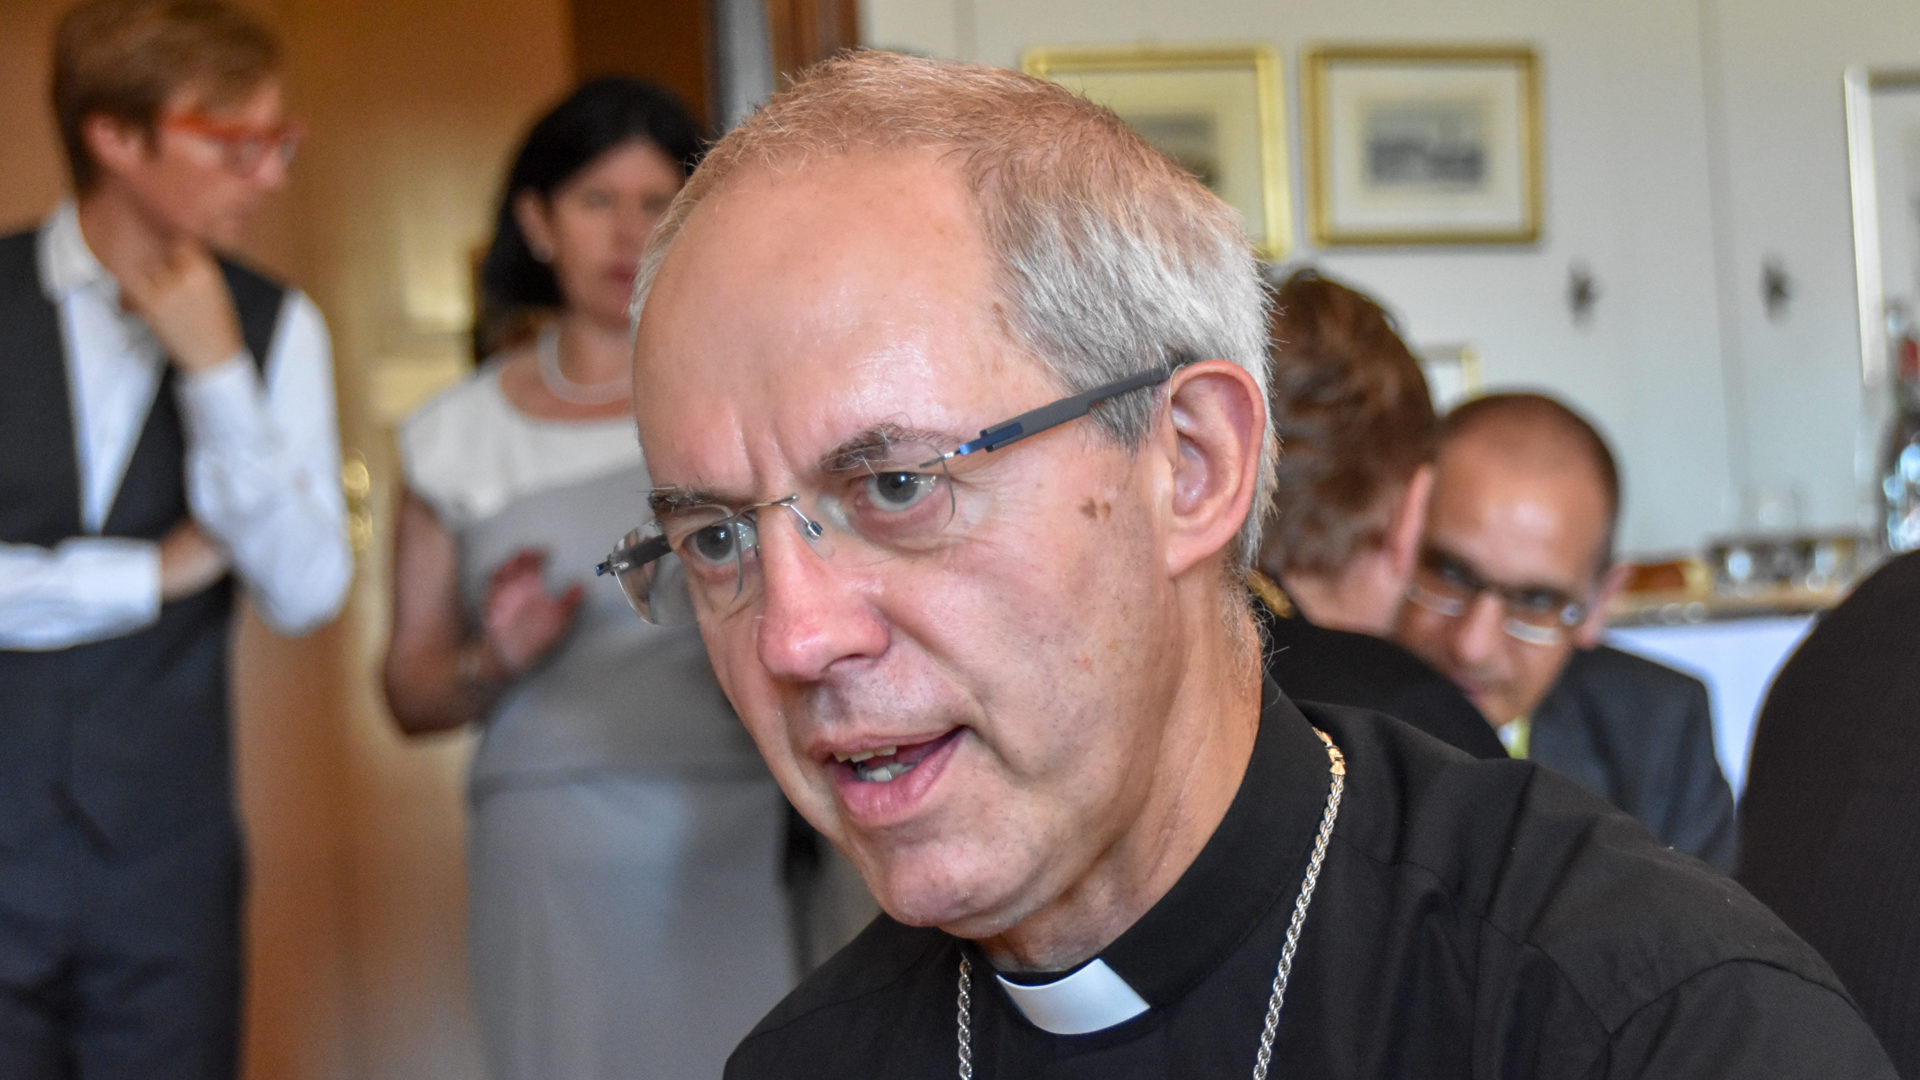 Justin Welby, primat de l'Eglise anglicane | © Maurice Page